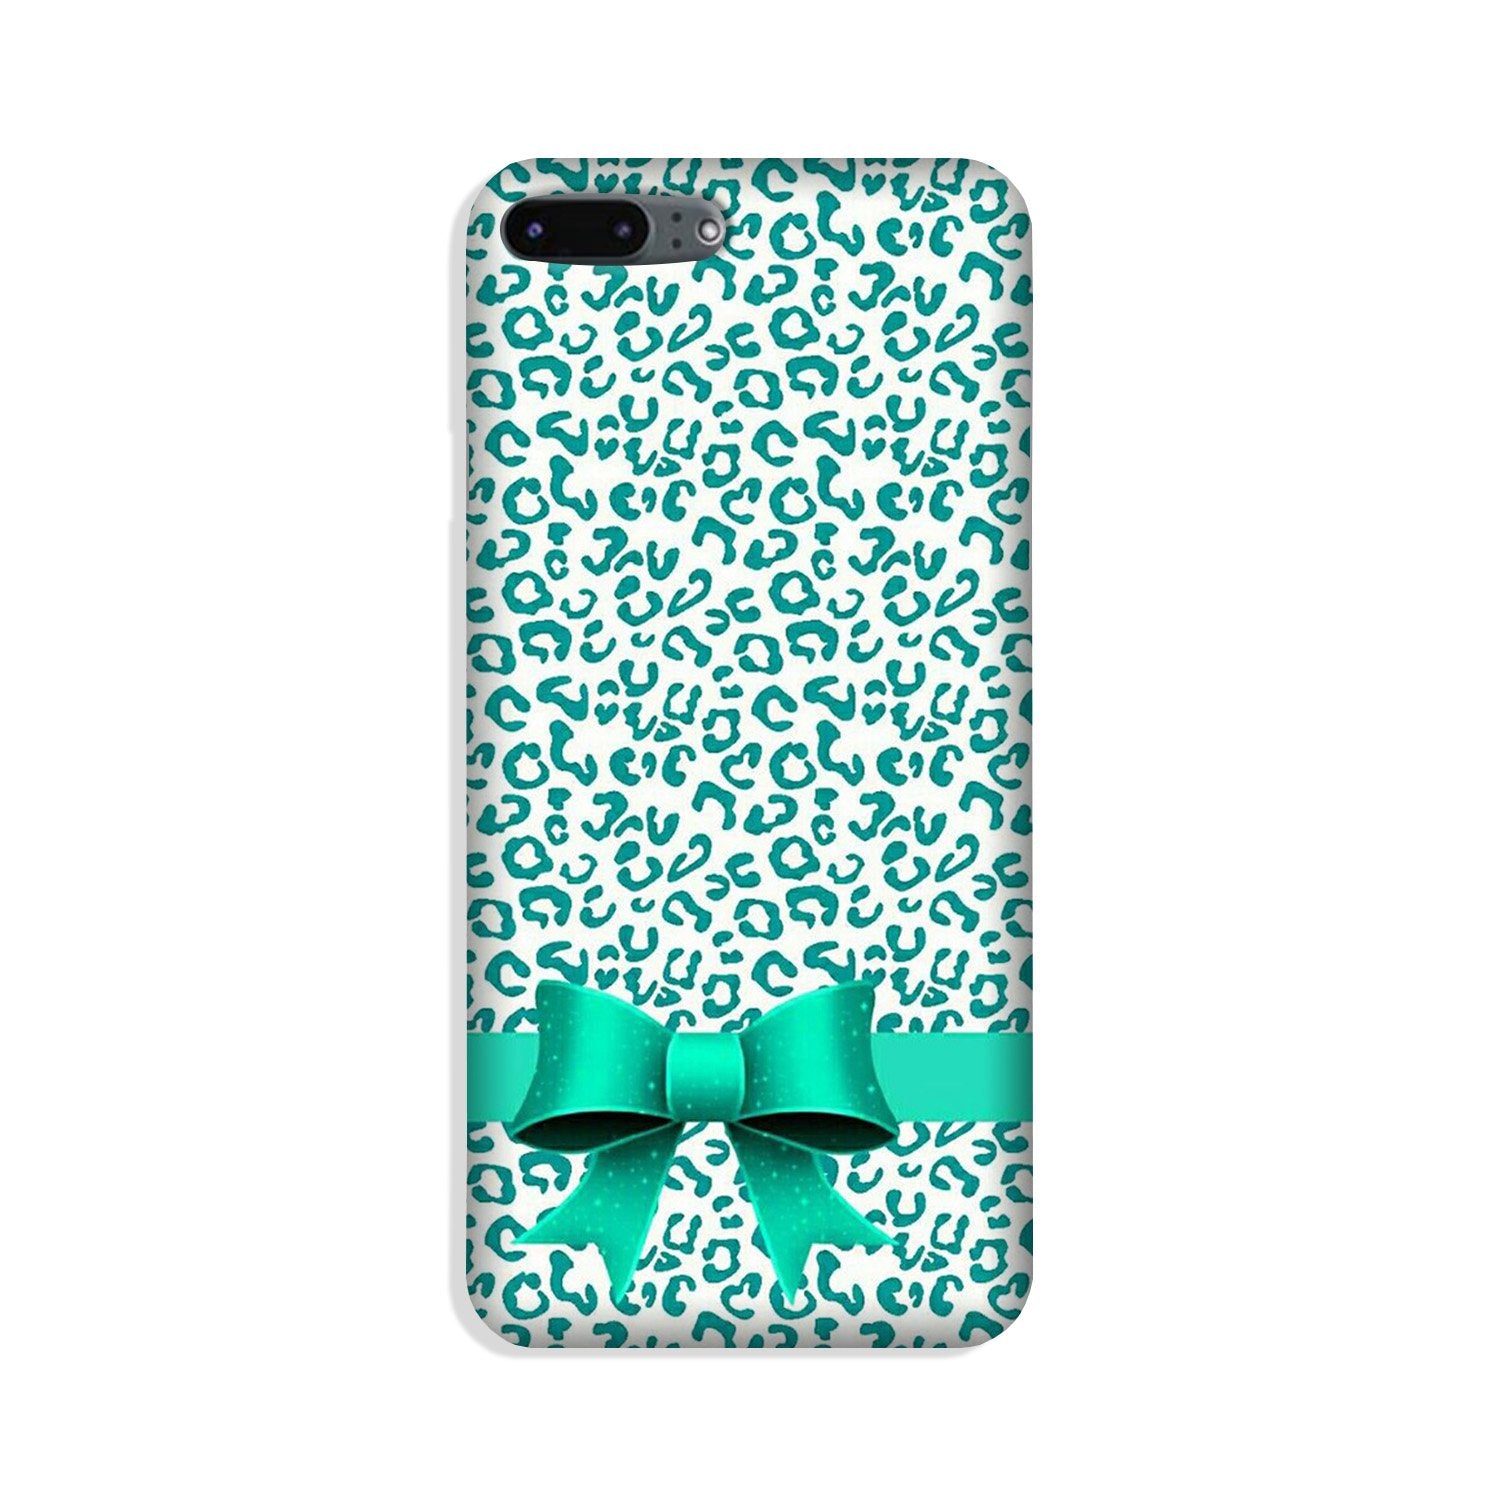 Gift Wrap6 Case for iPhone 8 Plus